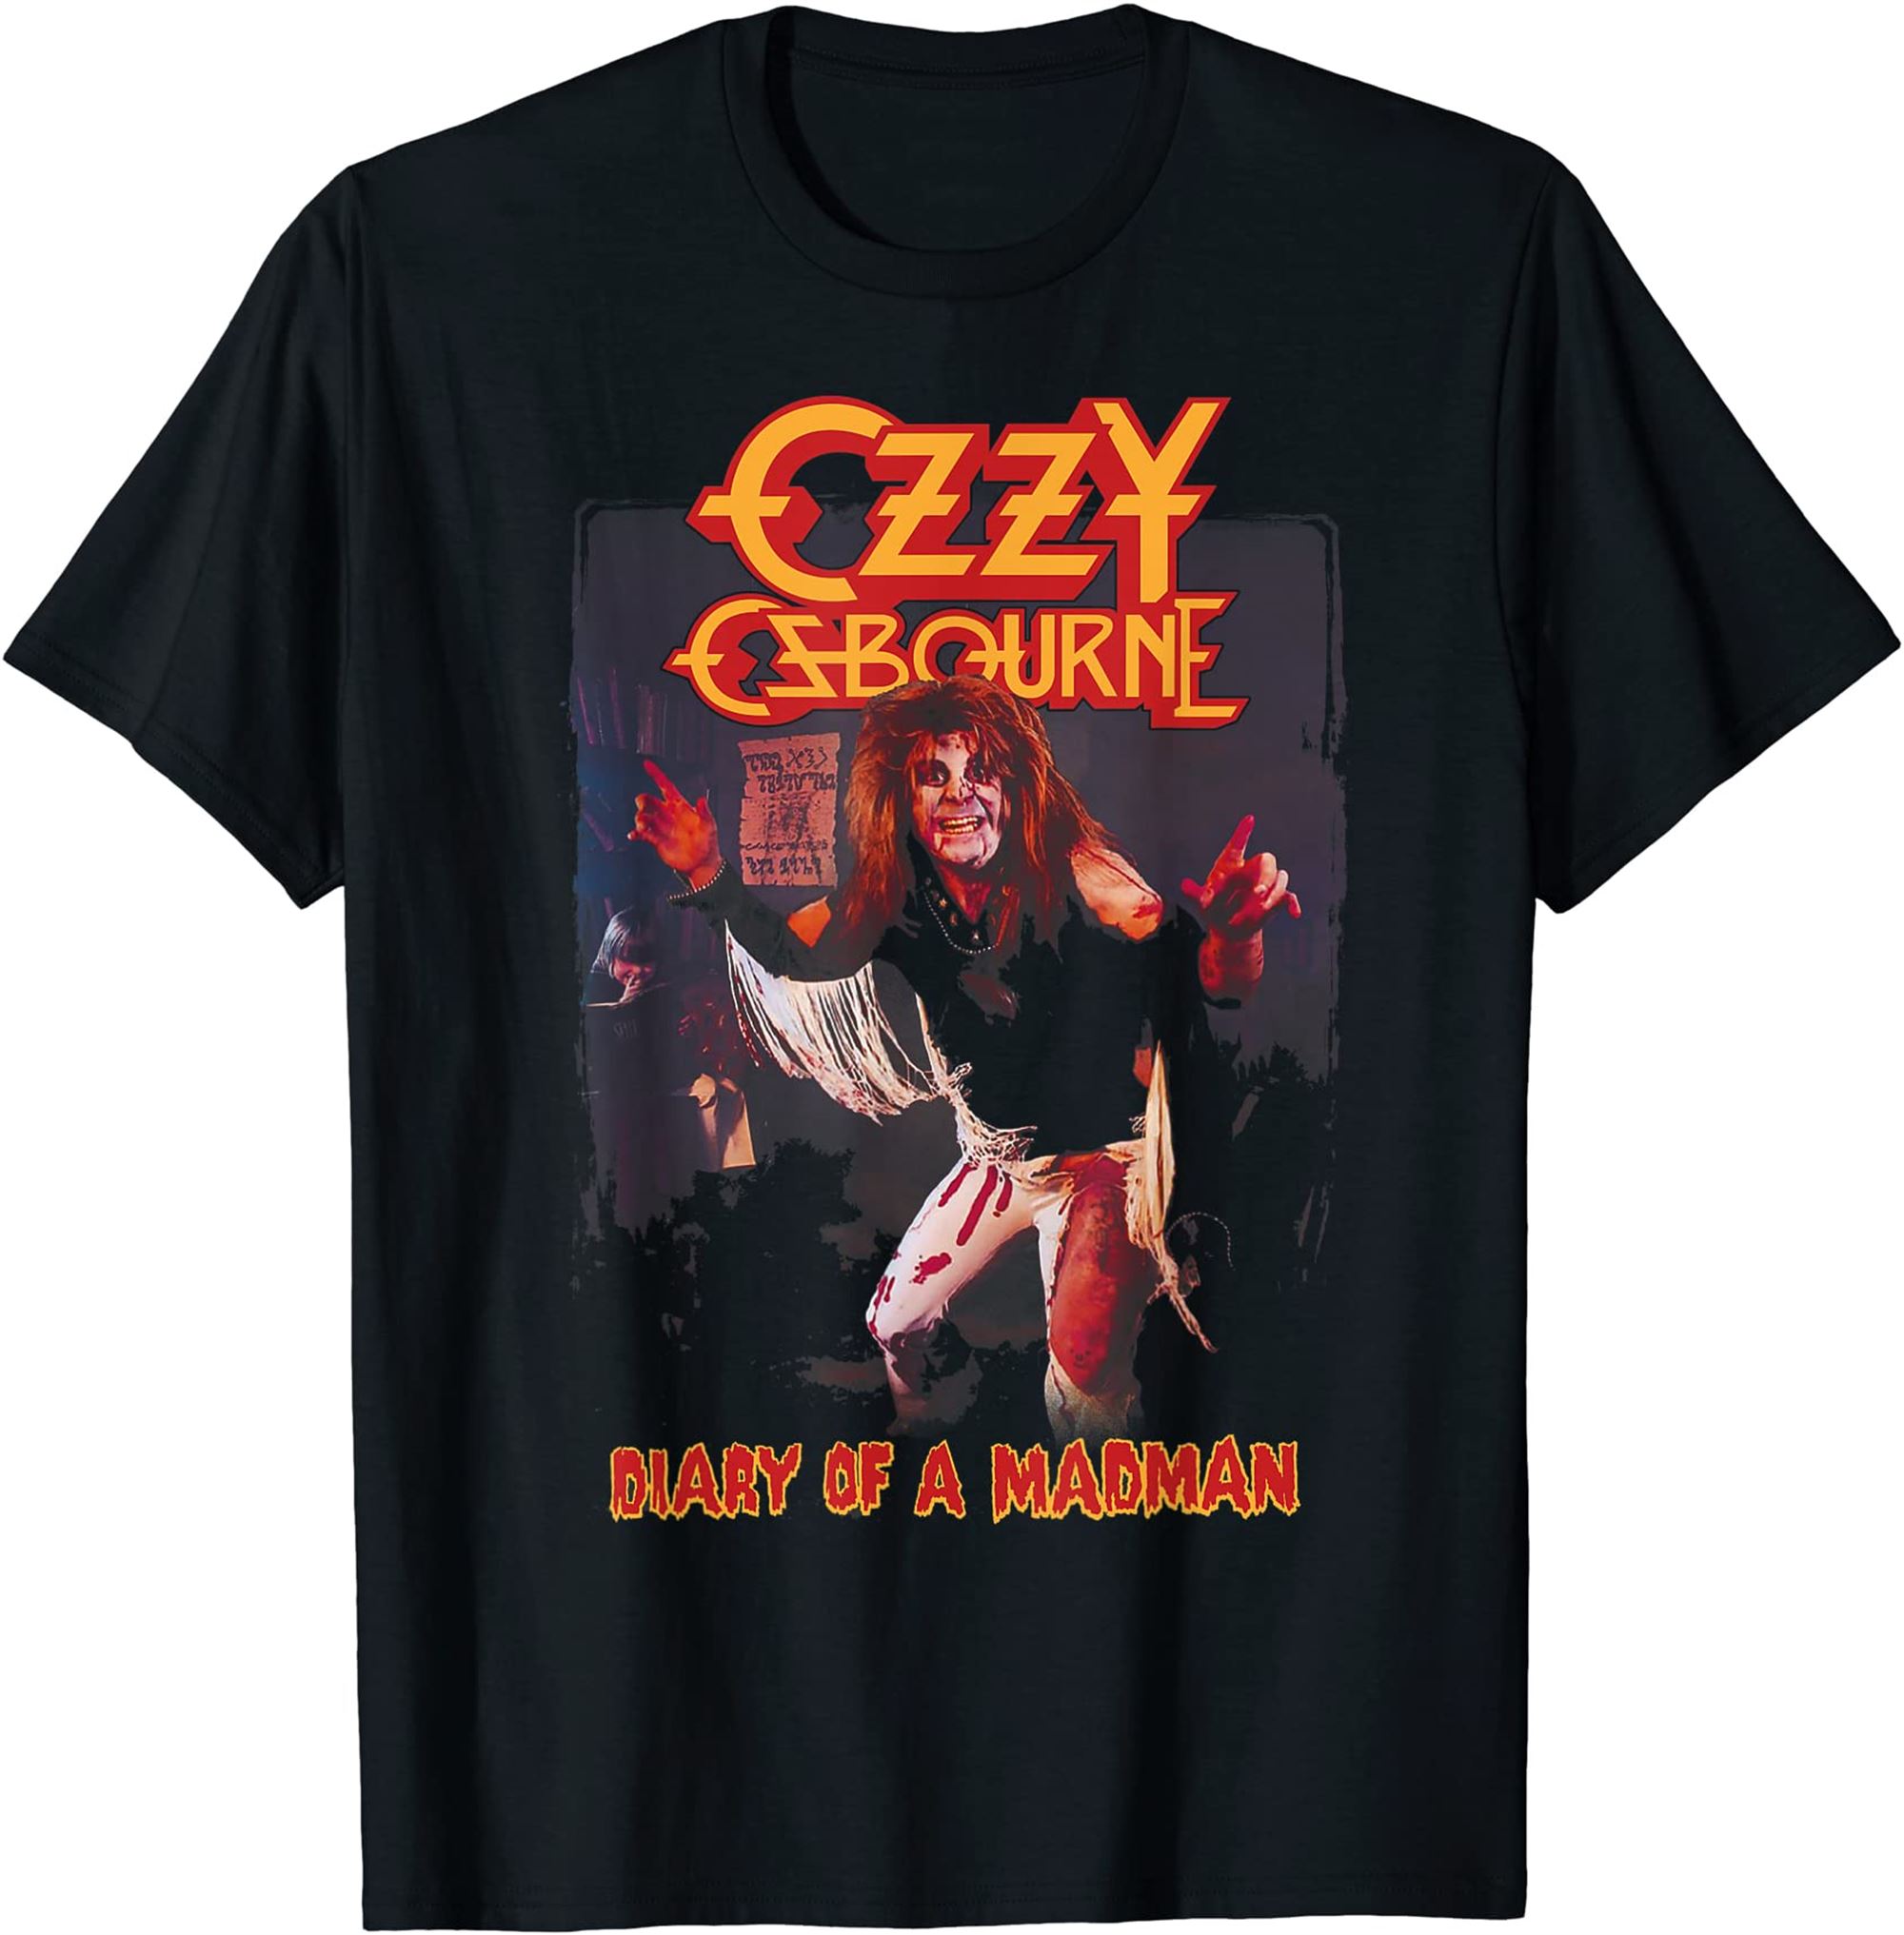 Ozzy Osbourne Diary Of A Madman T-shirt Size Up To 5xl